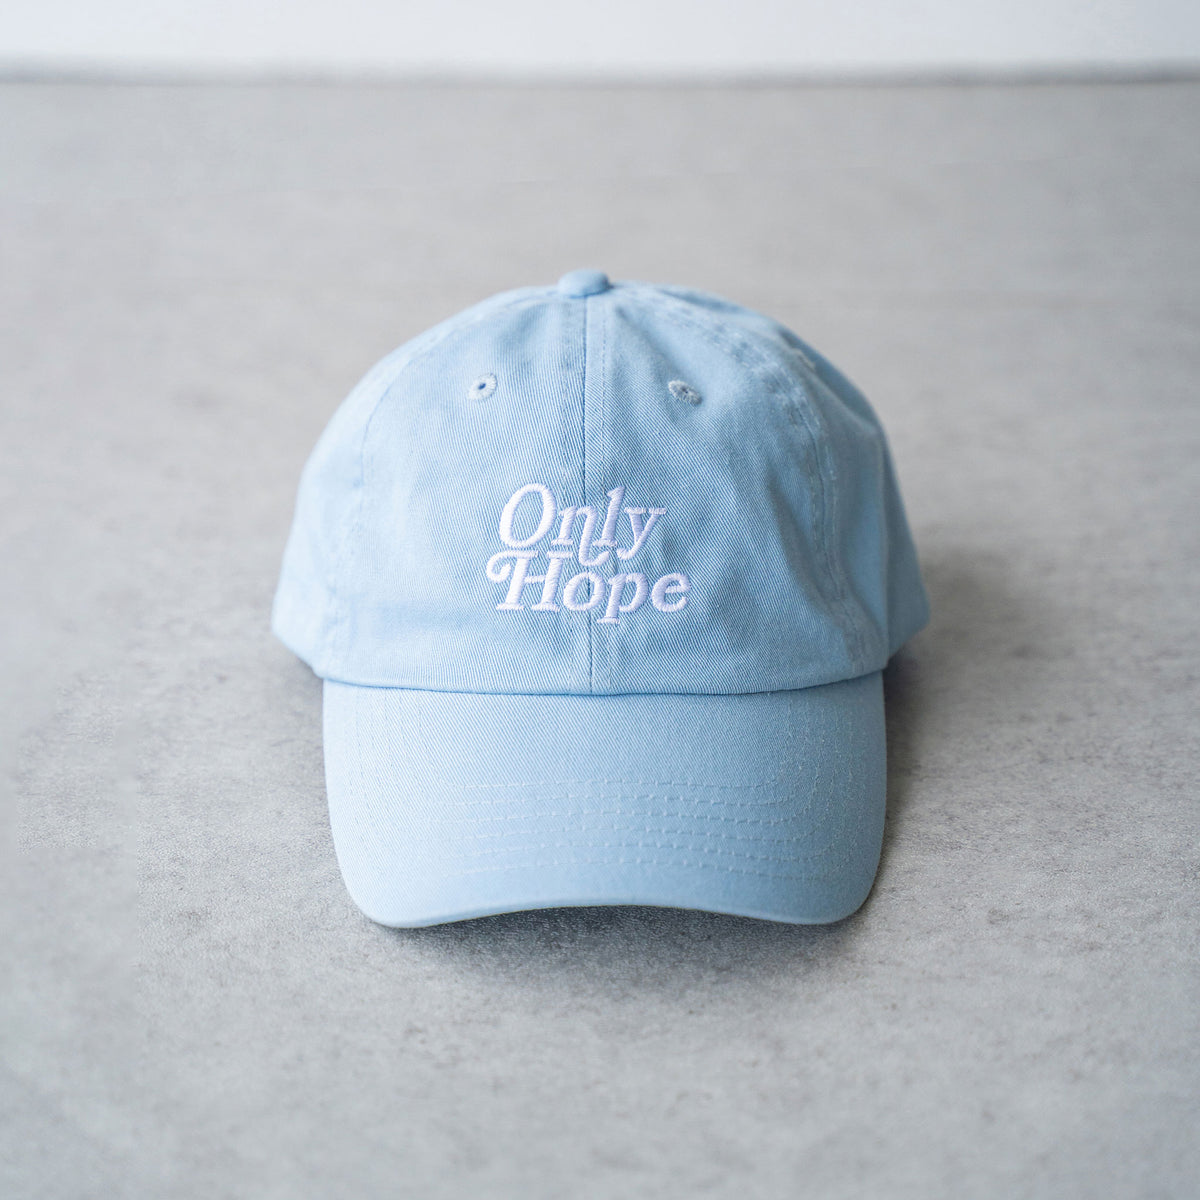 Powder blue, just for you.